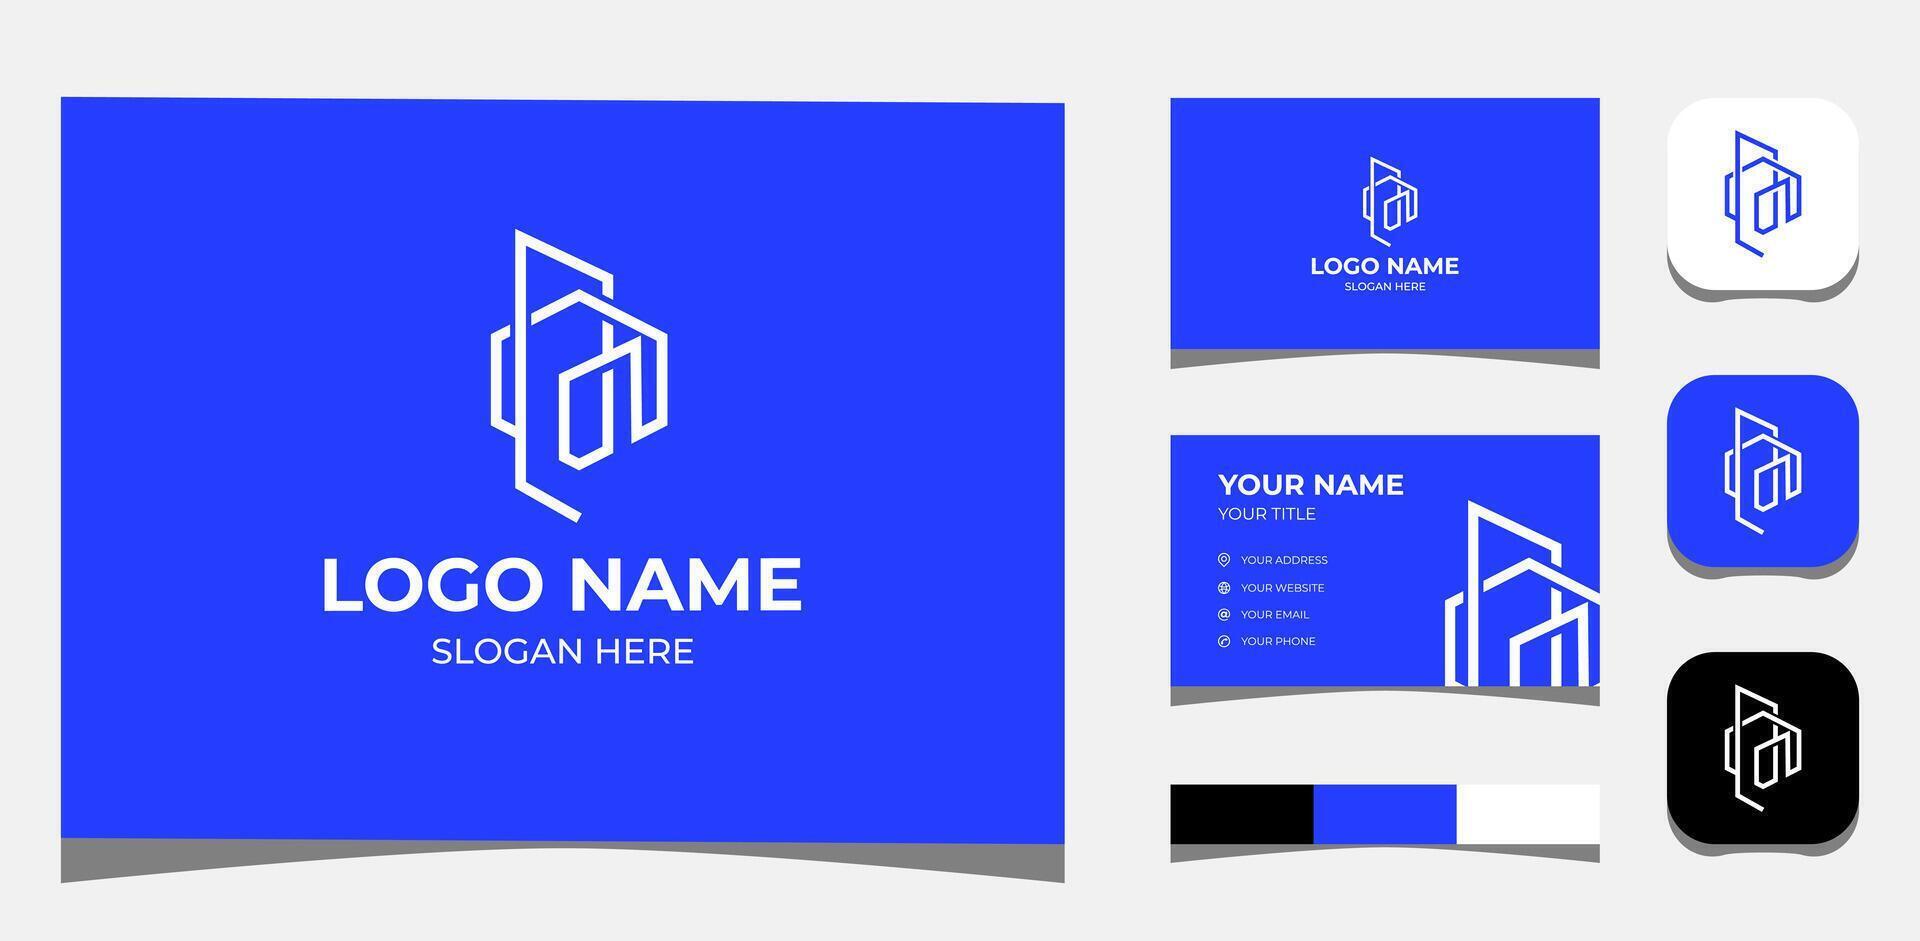 Template Logo Creative B P or B P M in Solid shape or Building concept. Creative Template with color pallet, visual branding, business card and icon. vector